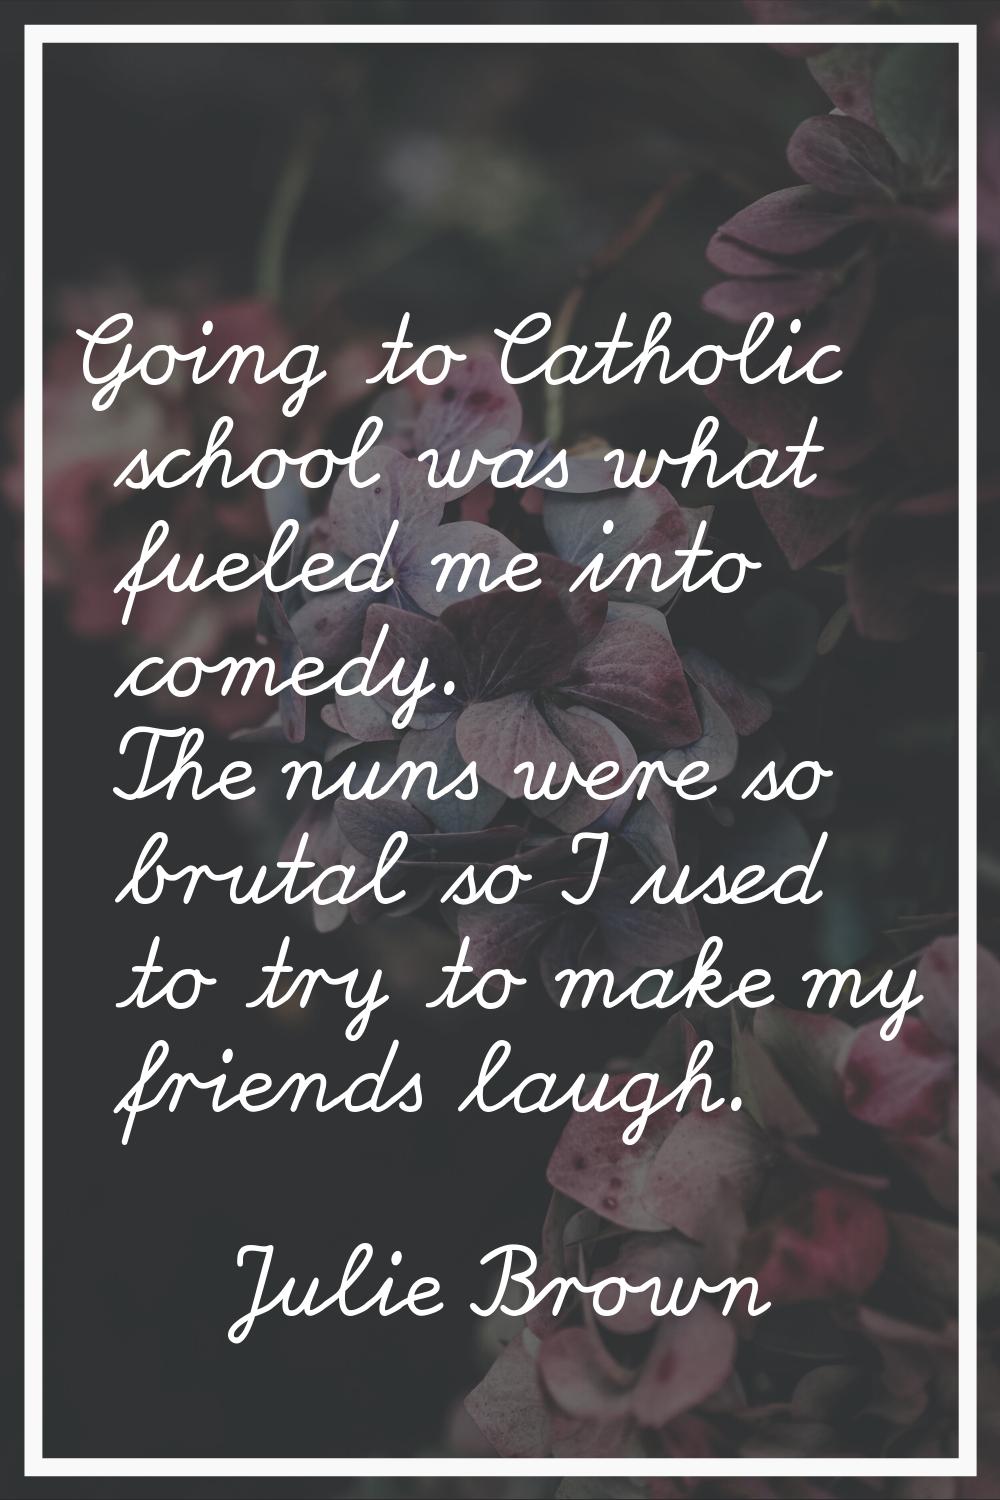 Going to Catholic school was what fueled me into comedy. The nuns were so brutal so I used to try t